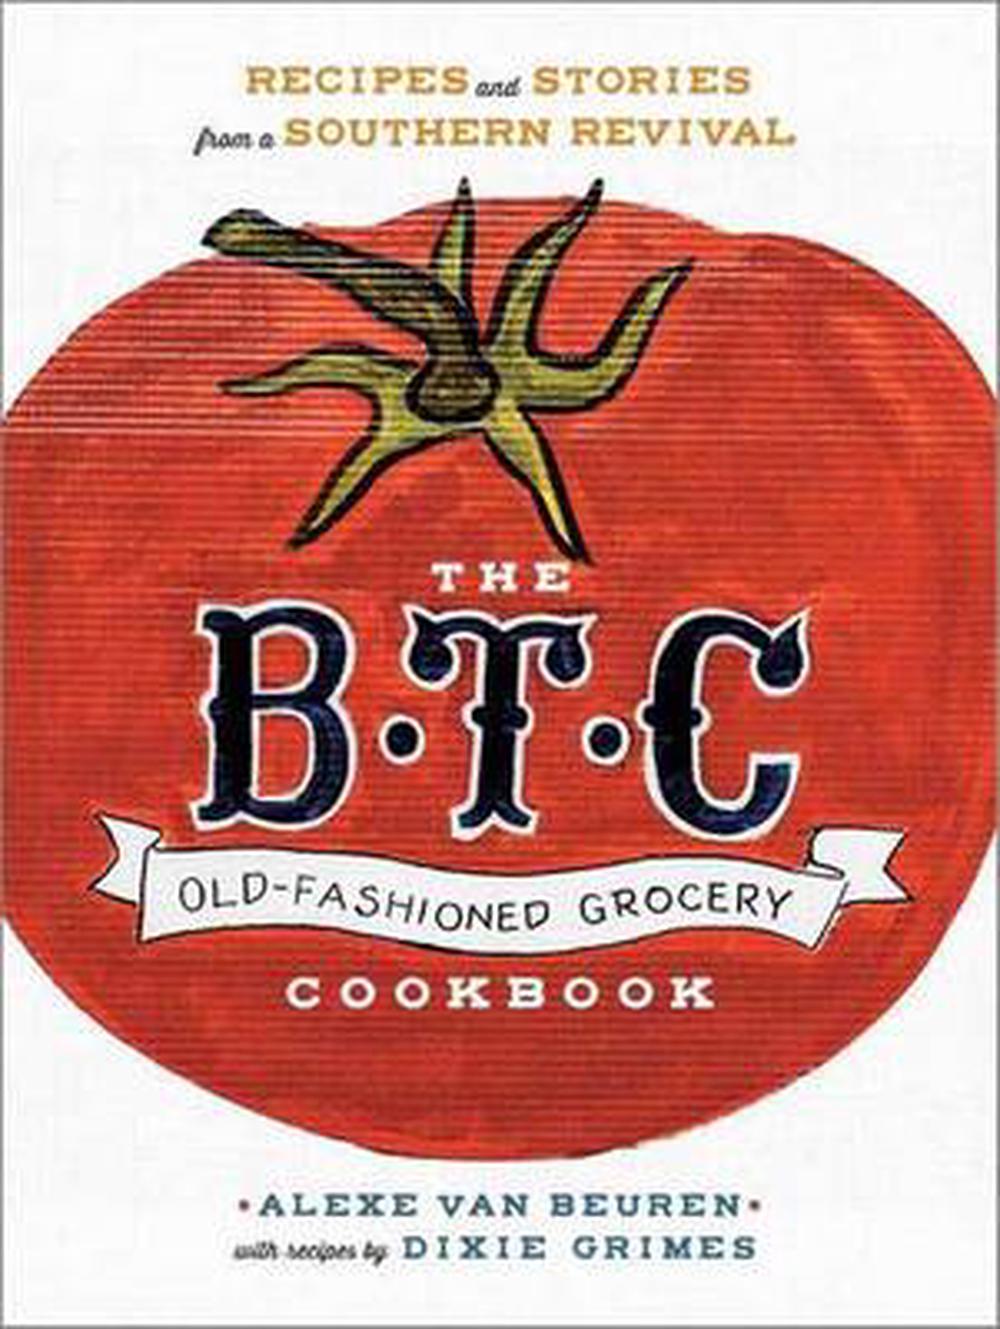 the btc old fashioned grocery cookbook